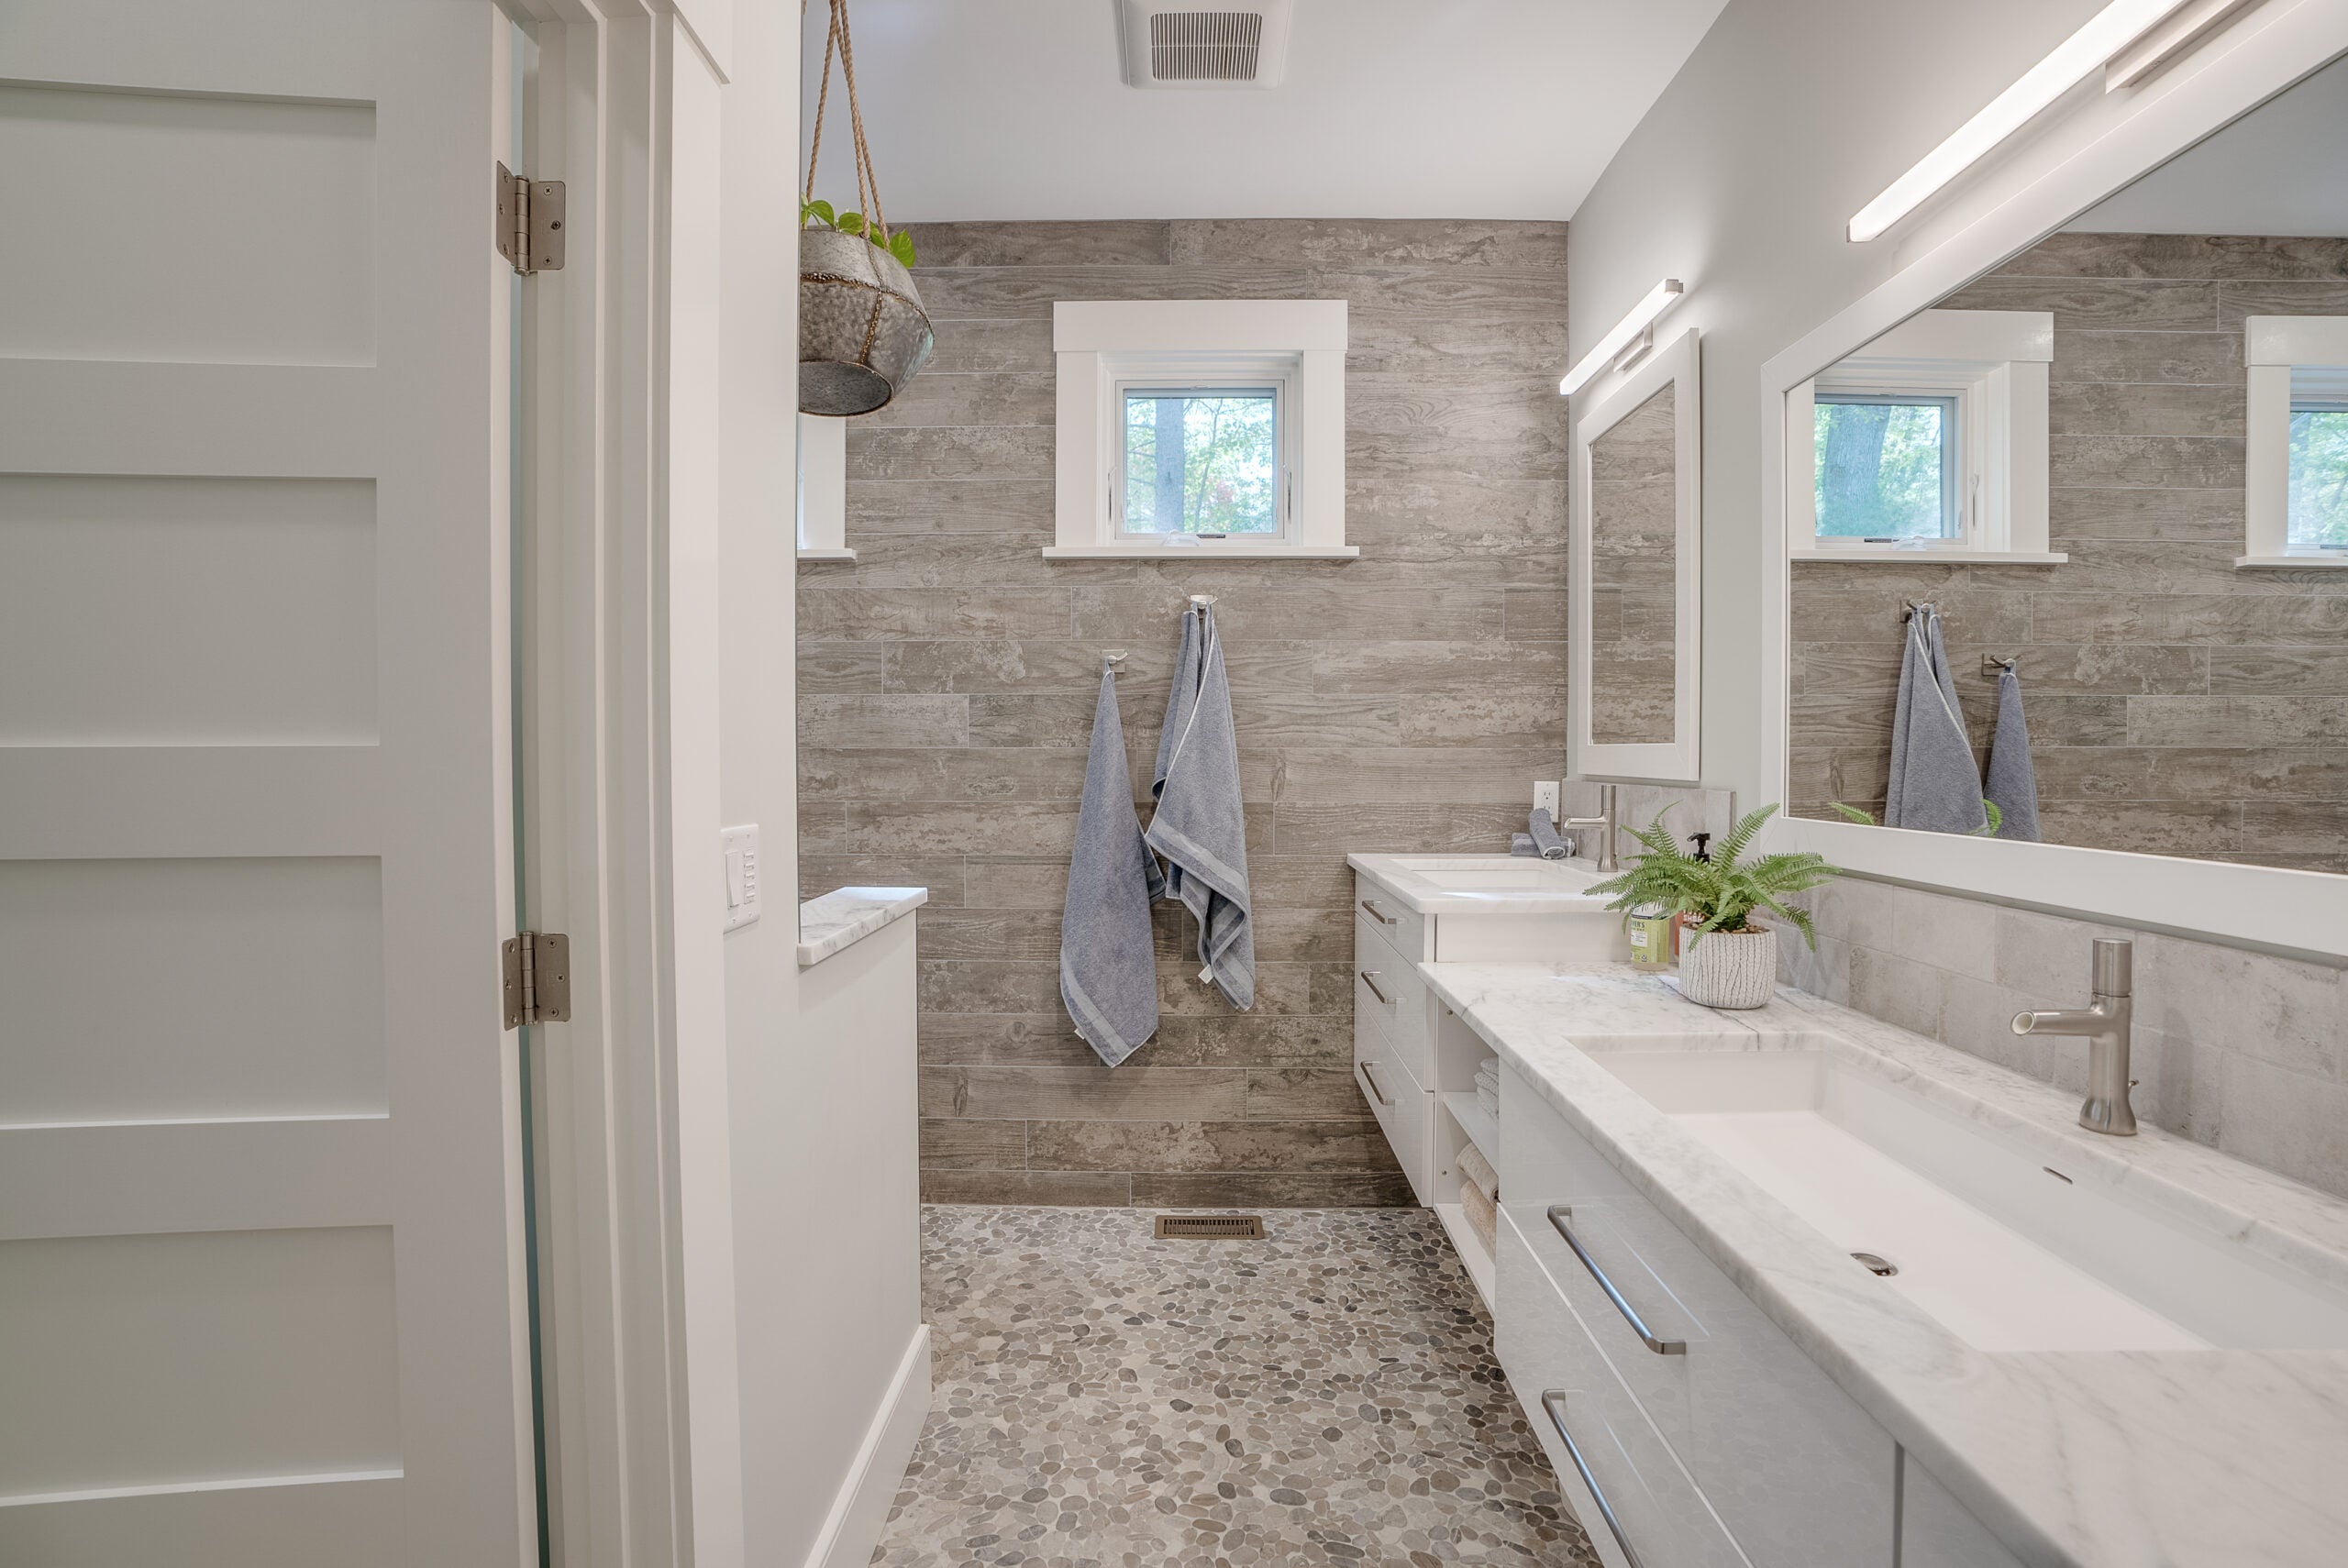 A bathroom with a floating double vanity that is long. The flooring is tile, as are the walls.